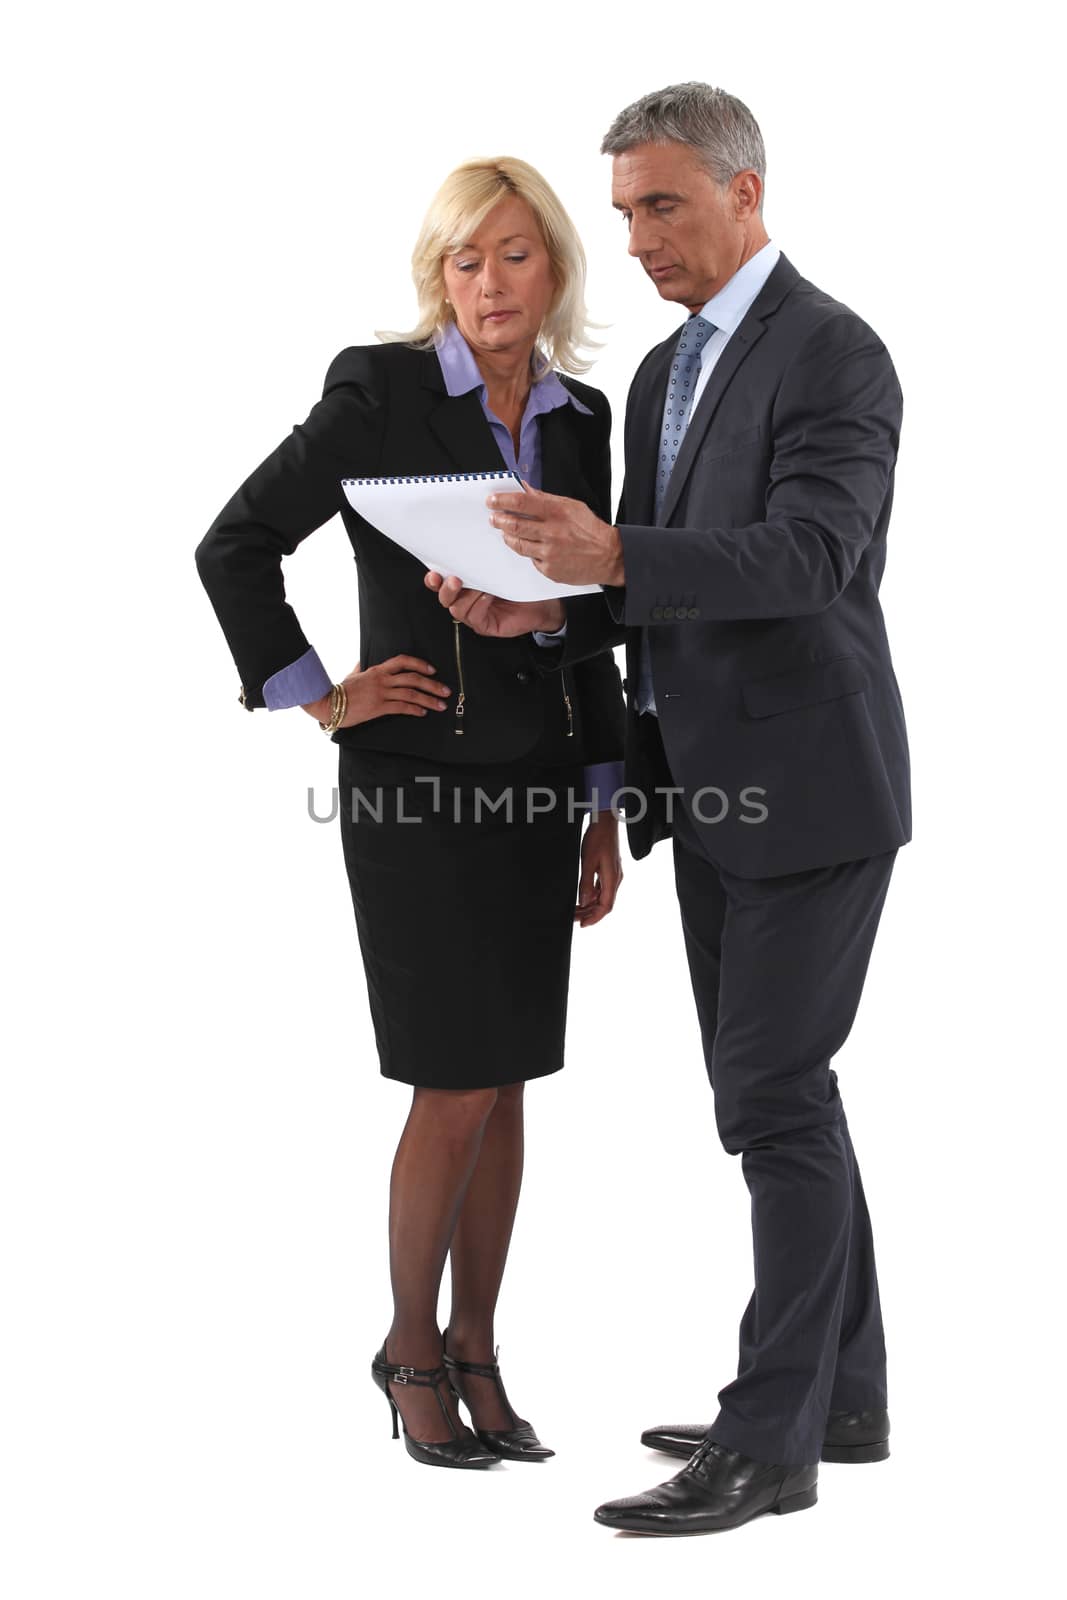 Couple discussing a document